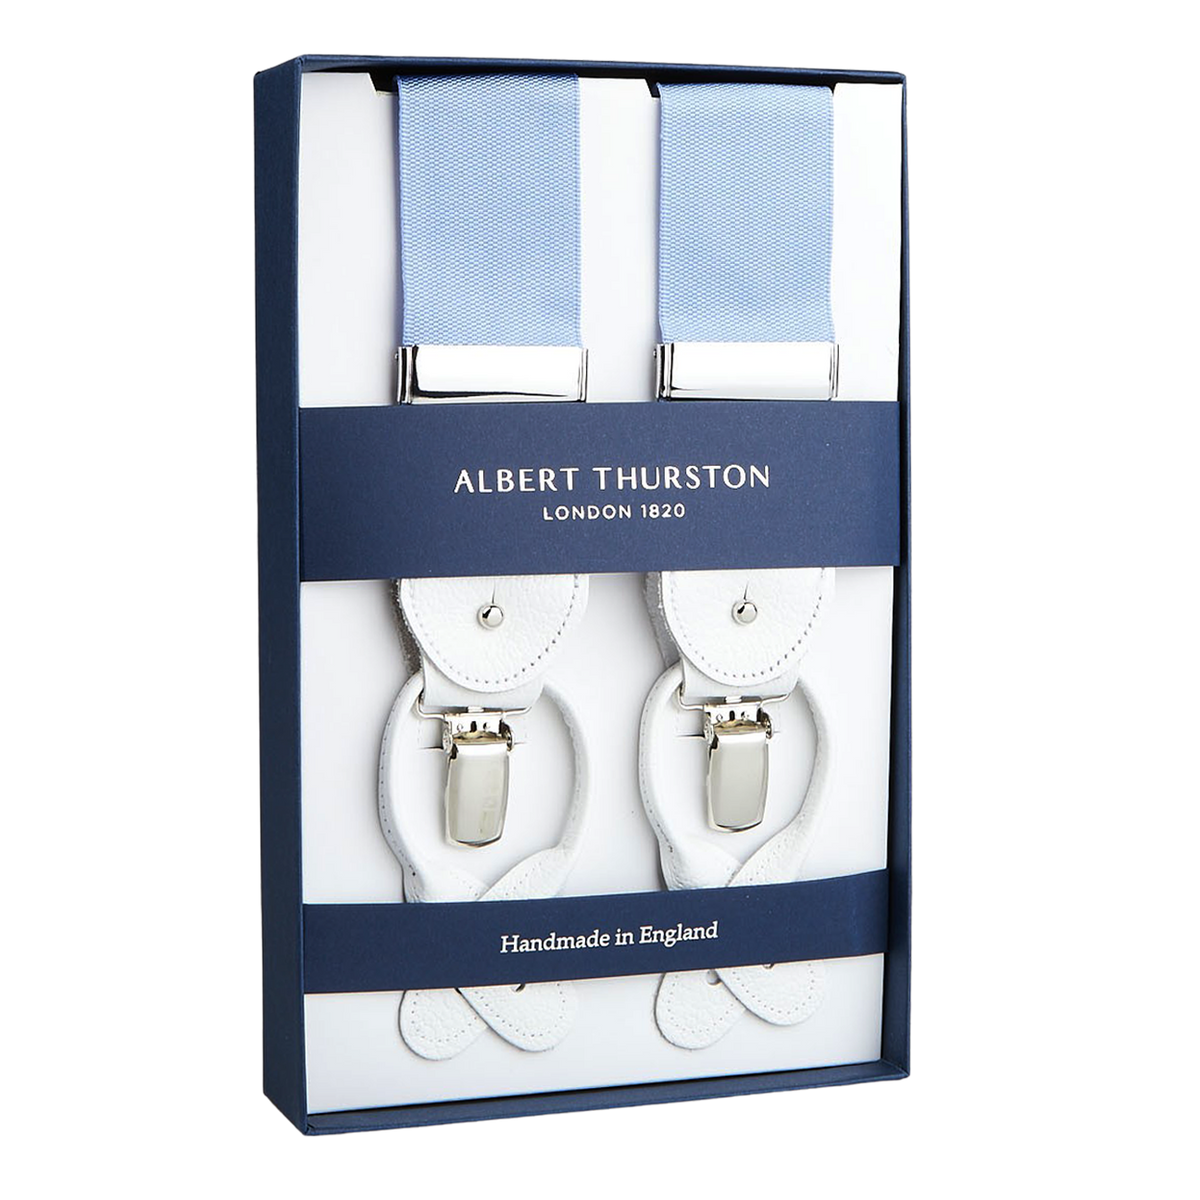 A pair of Albert Thurston Crayon Blue Nylon White Leather 40 mm braces displayed in a box, indicating they are crafted from stretchable nylon fabric in England.